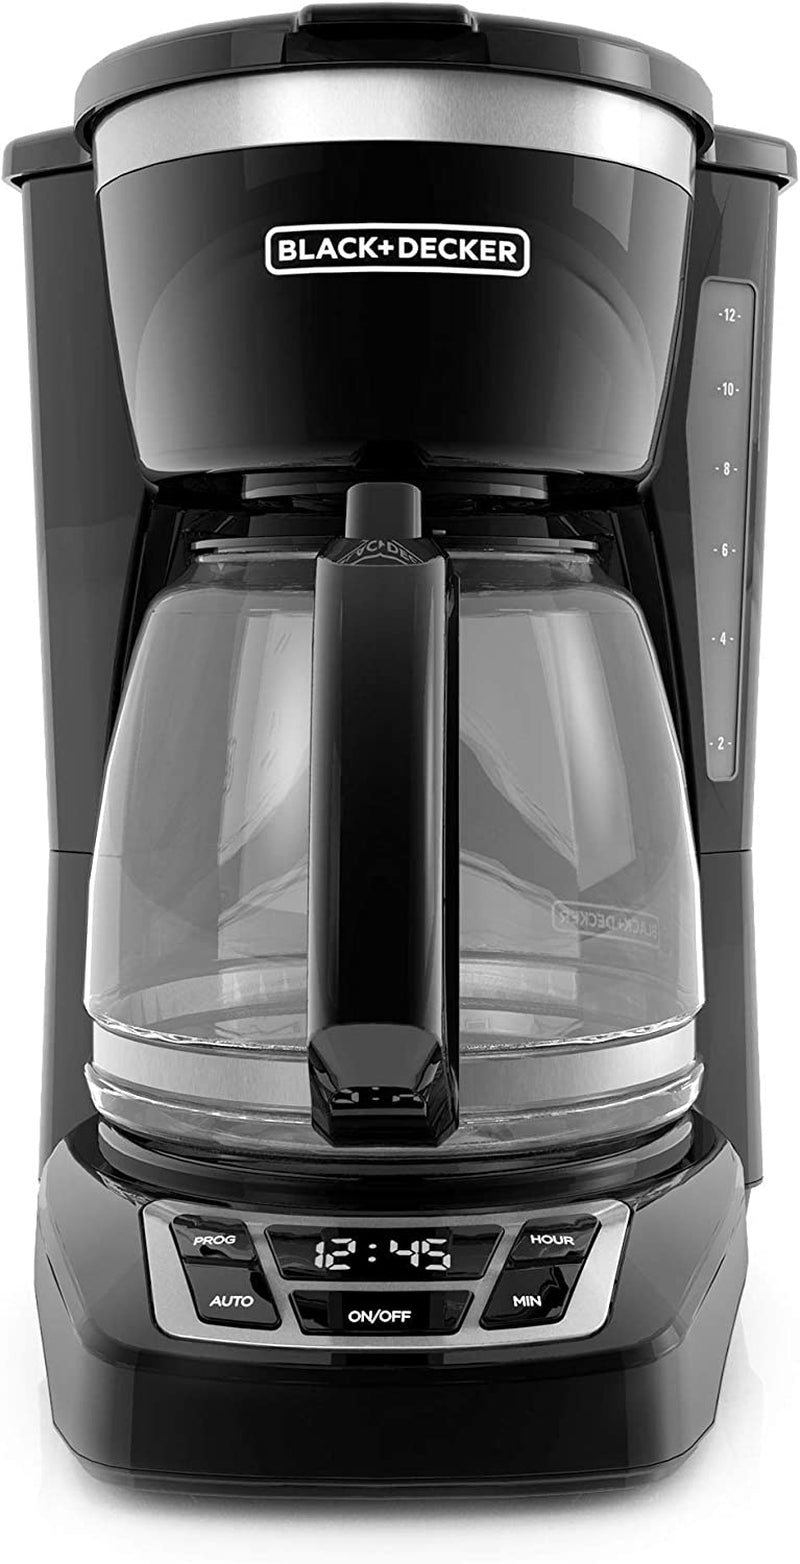 12-Cup Digital Coffee Maker, CM1160B, Programmable, Washable Basket Filter, Sneak-A-Cup, Auto Brew, Water Window, Keep Hot Plate, Black